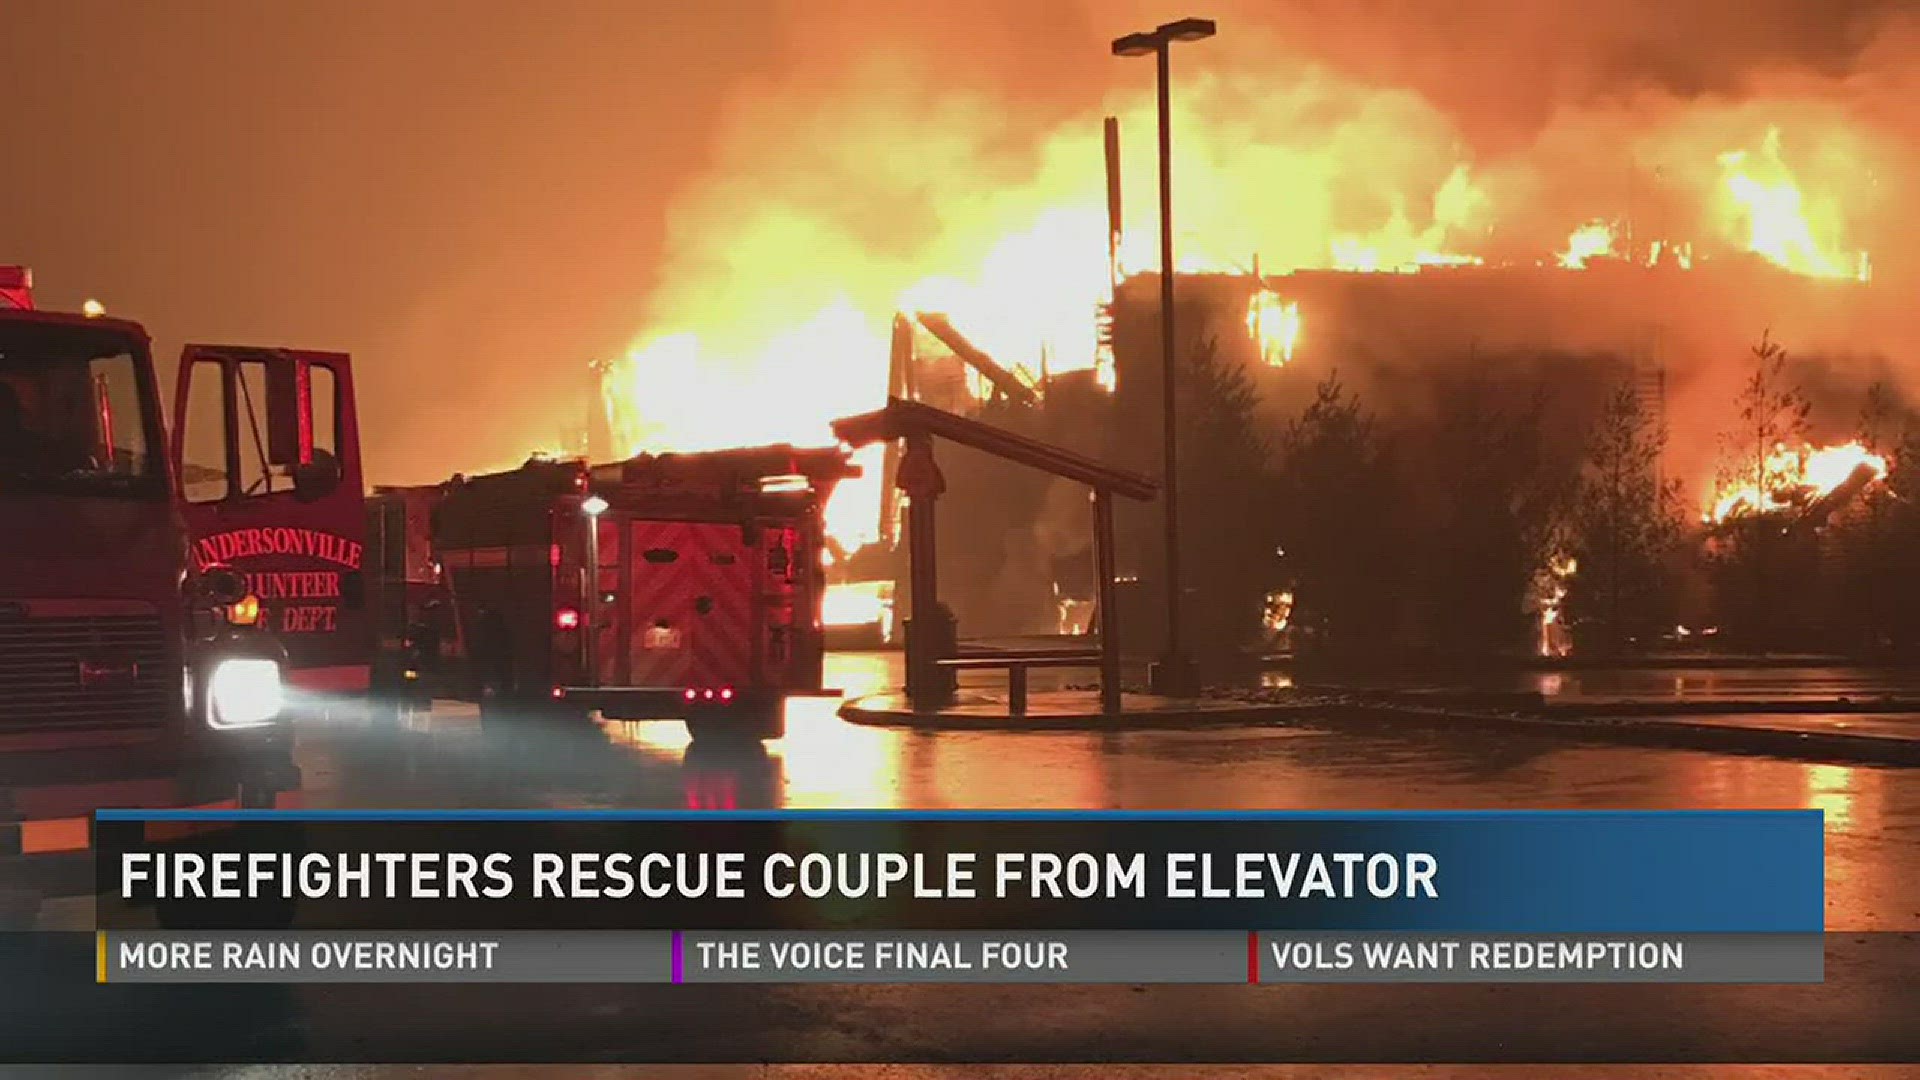 Dec. 5, 2016: A couple from Birmingham, Ala. had the chance to thank the firefighters who rescued them after they were trapped for hours inside an elevator at Westgate Resort during the Sevier County fires.